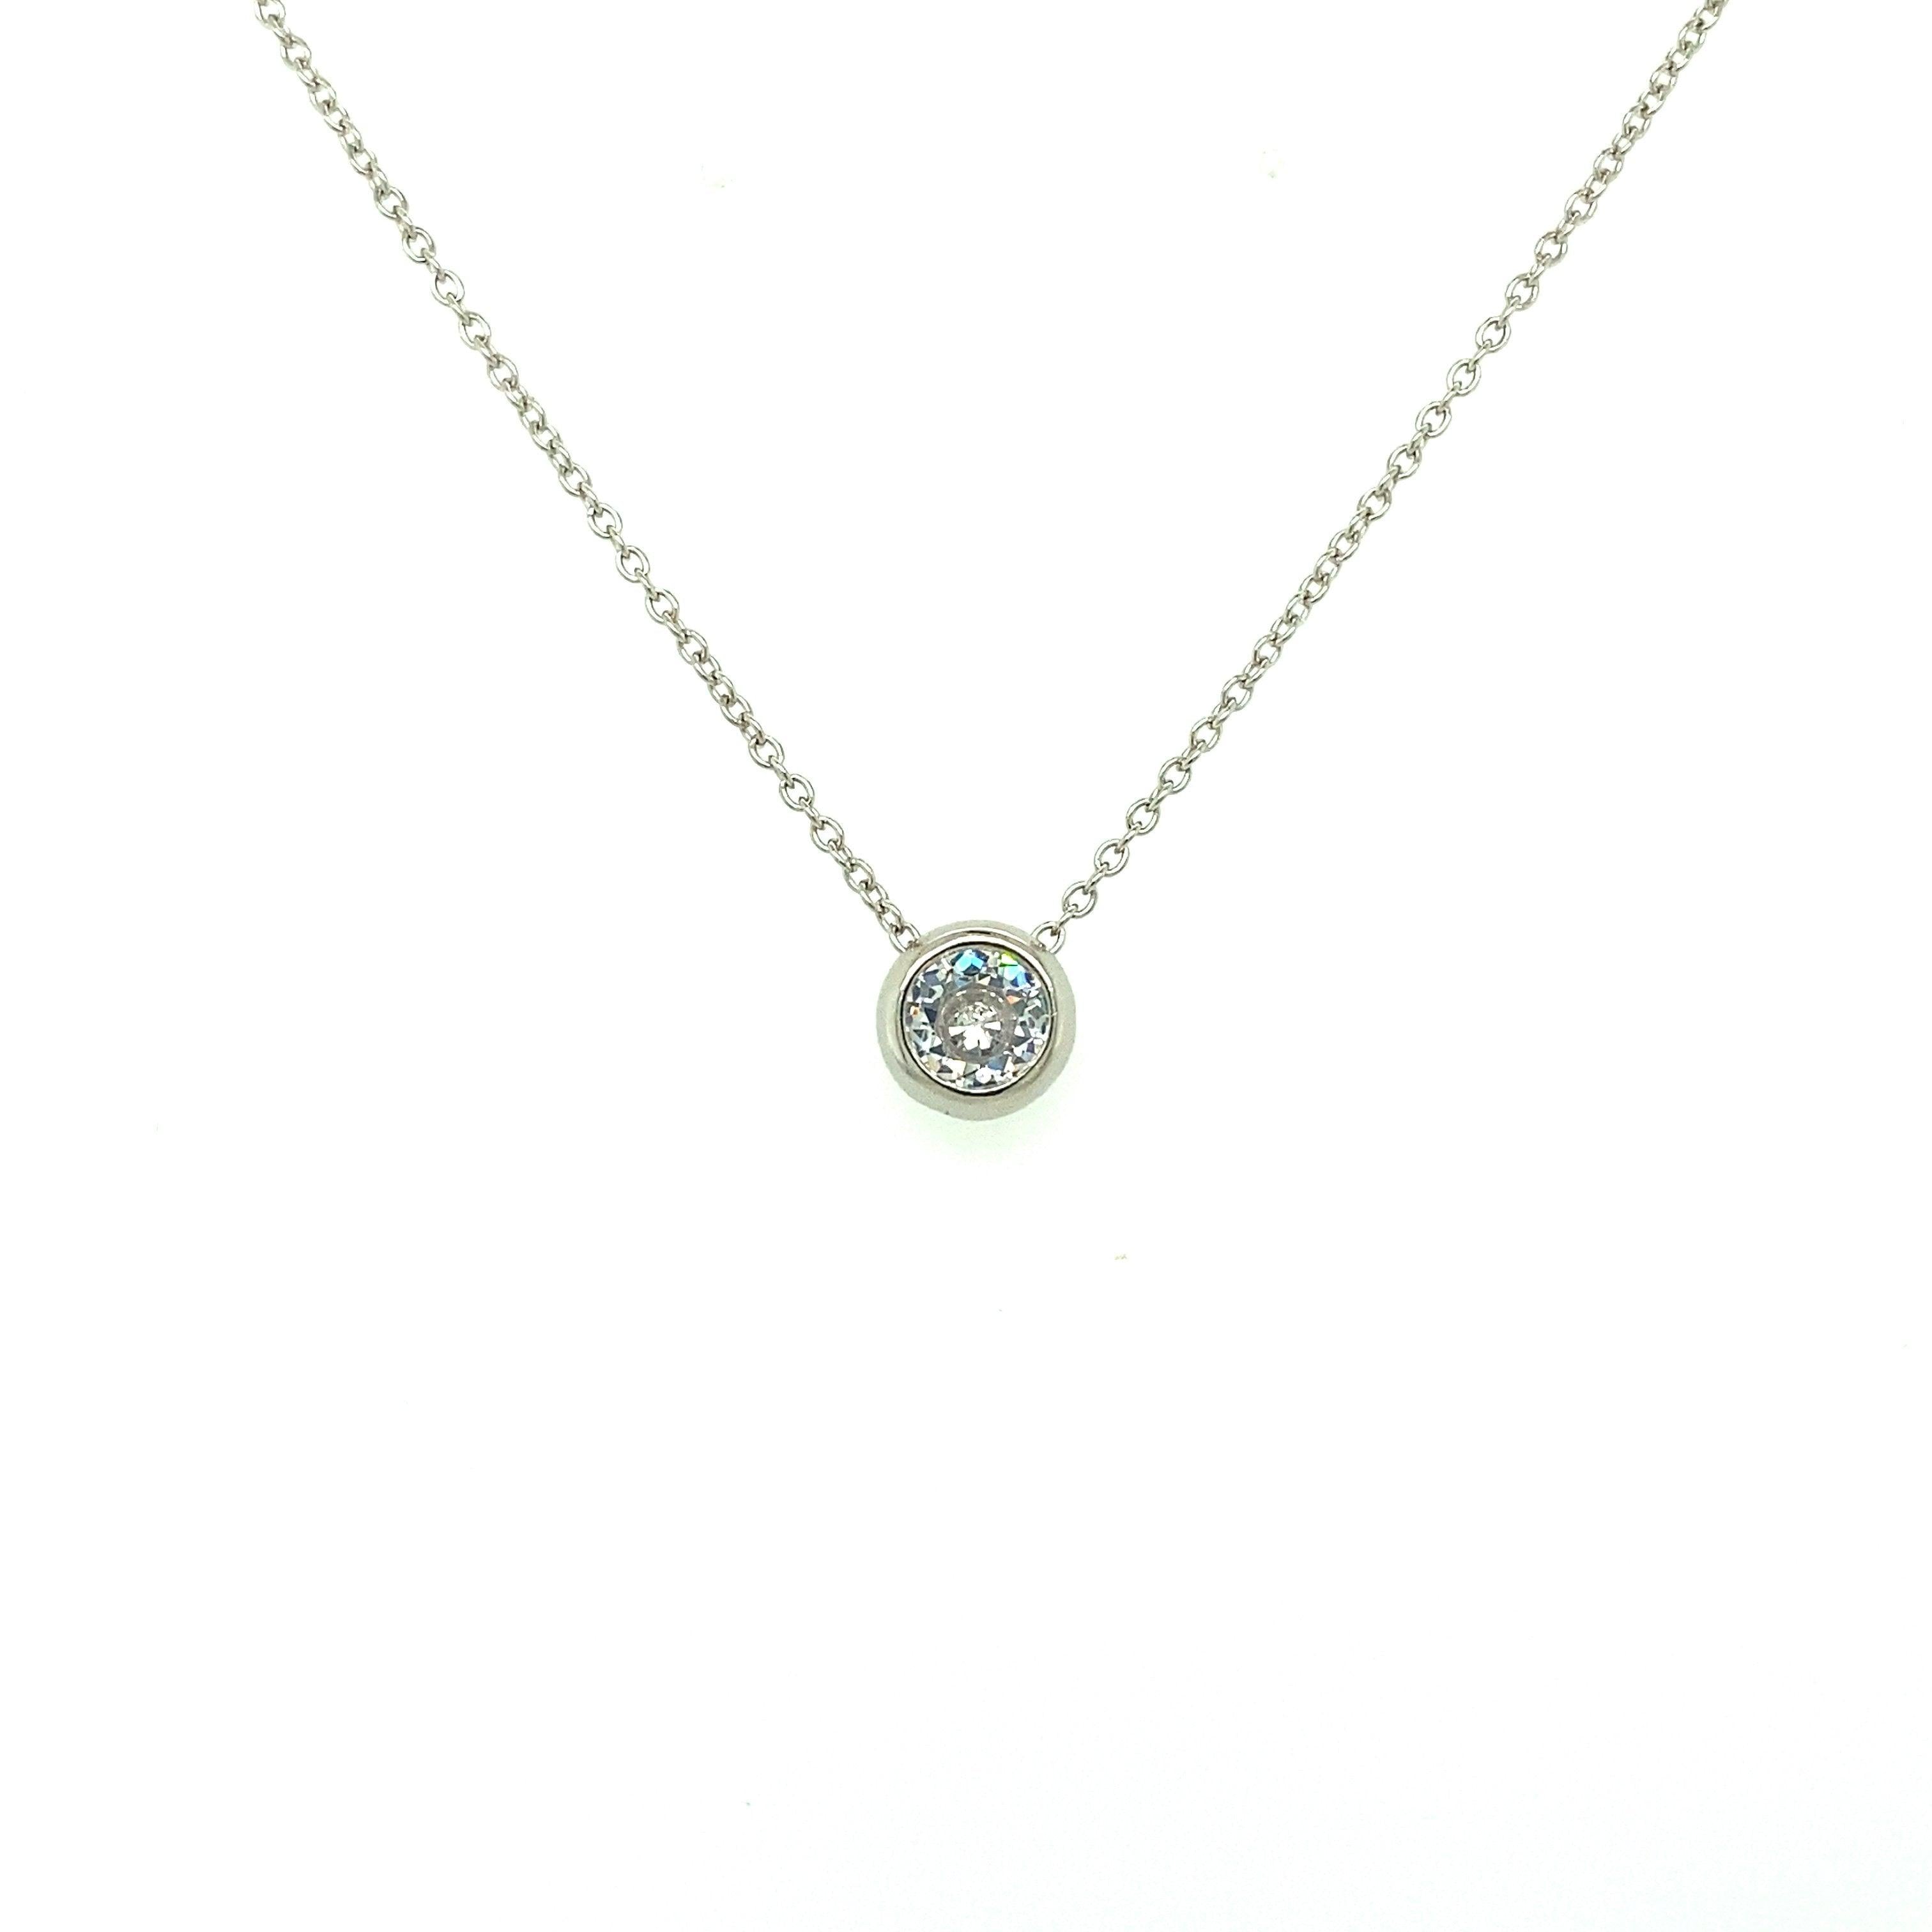 Necklace n1535 - 925 Sterling Silver - Asfour Crystal